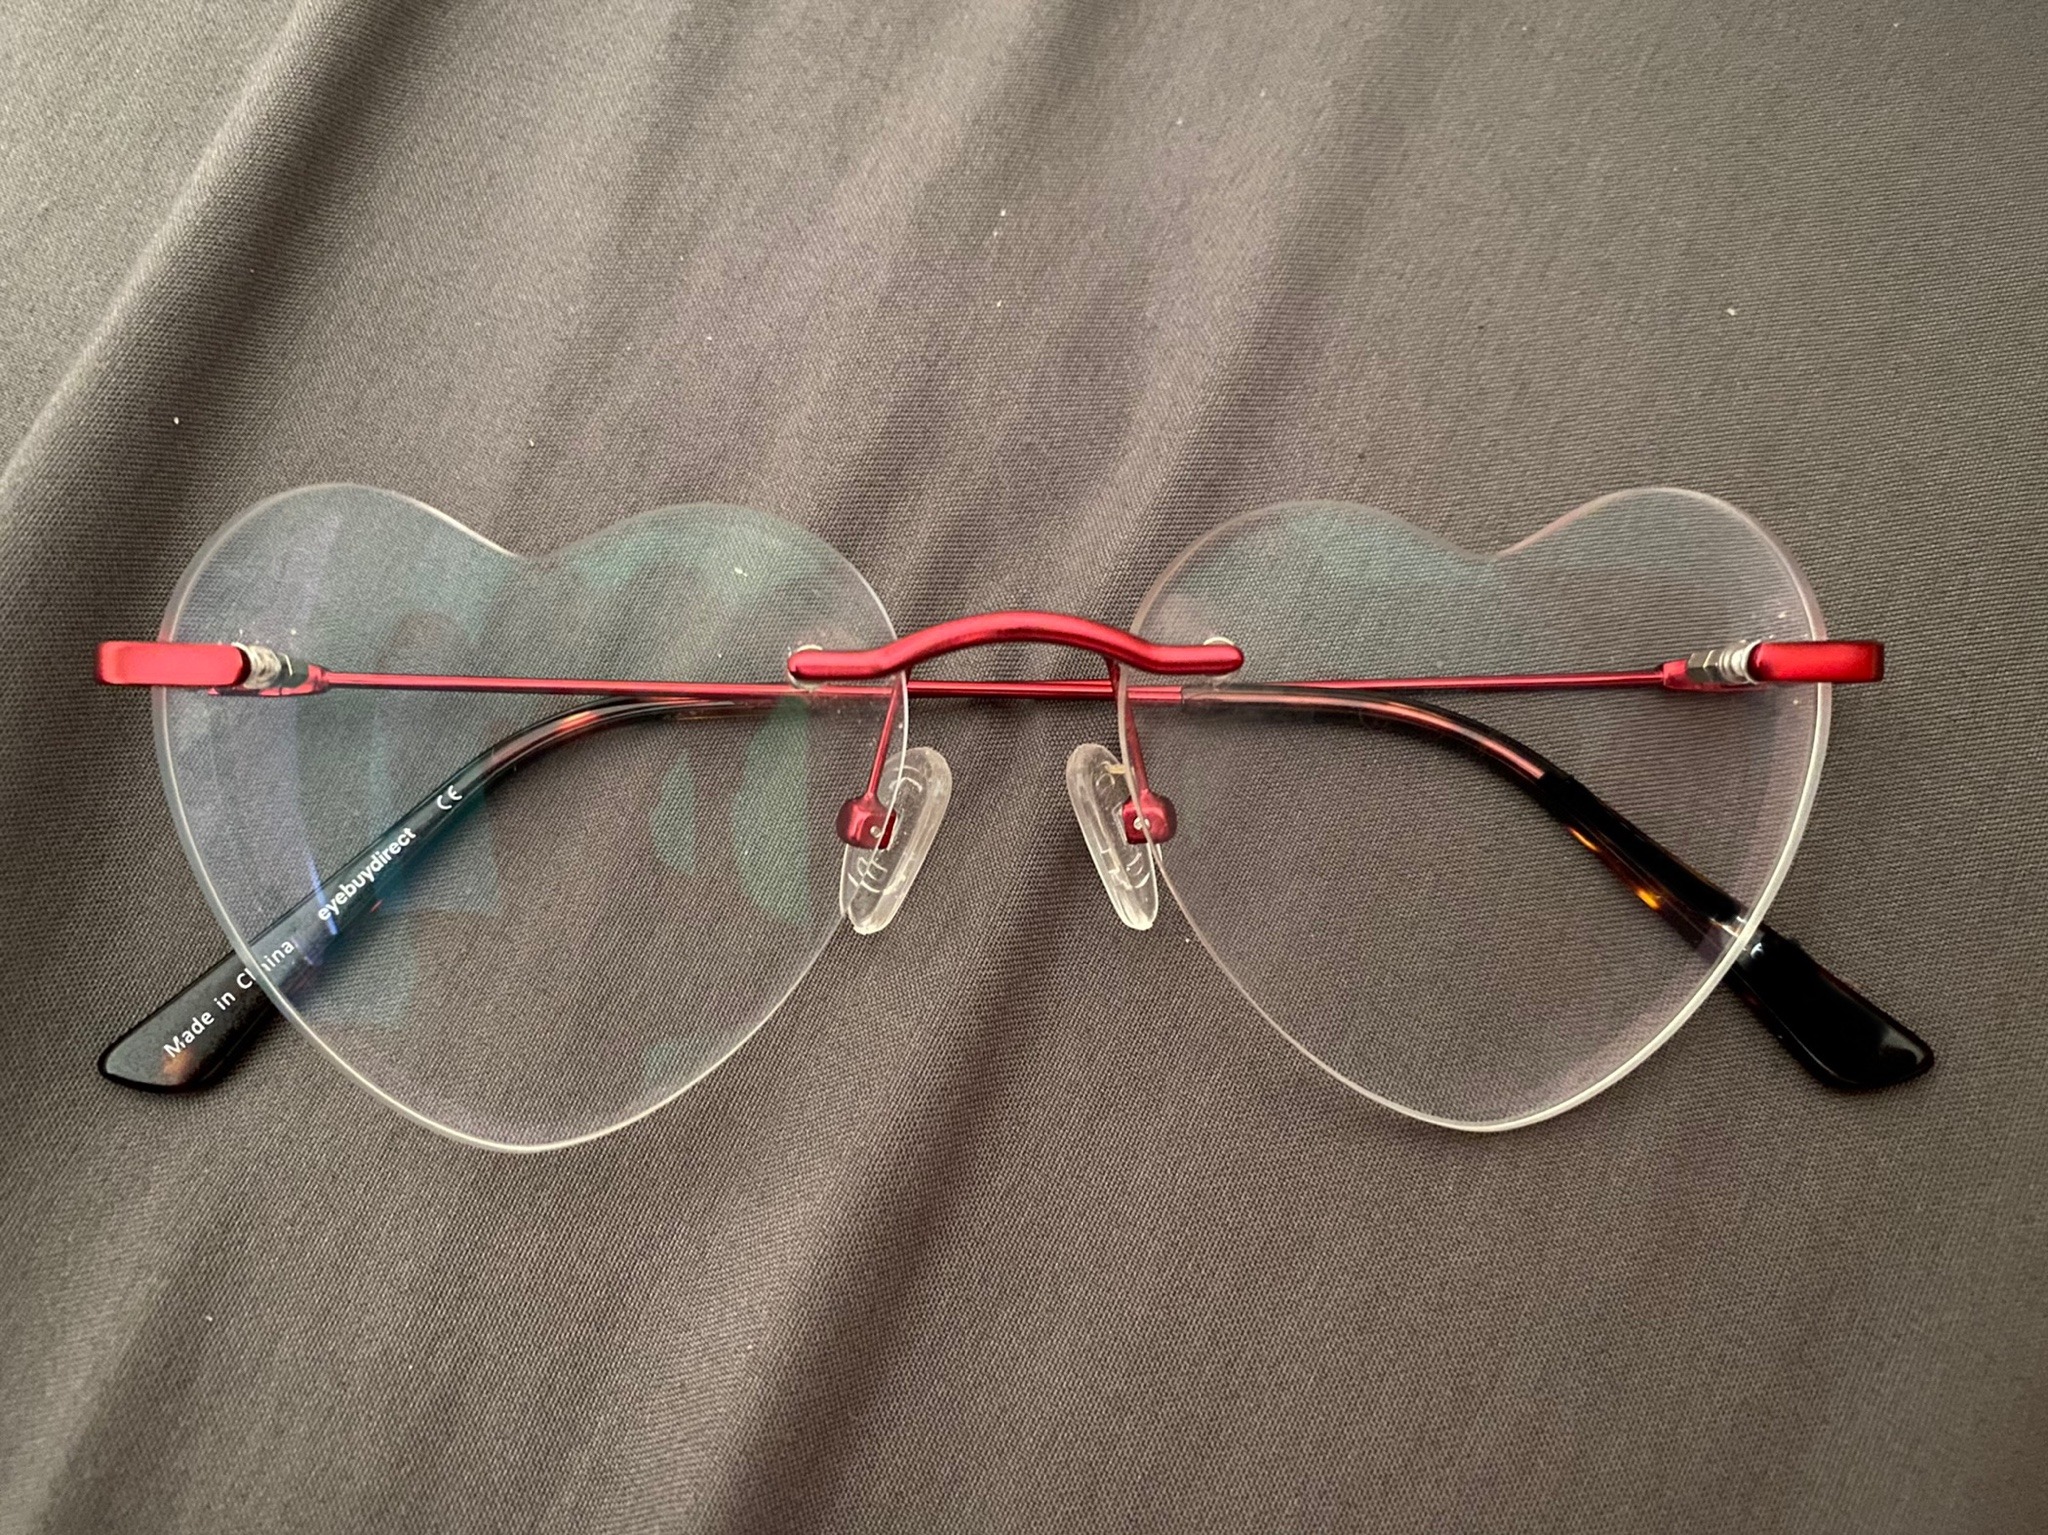 my-vintage-valentine:Society really advanced when we made heart shaped prescription glasses